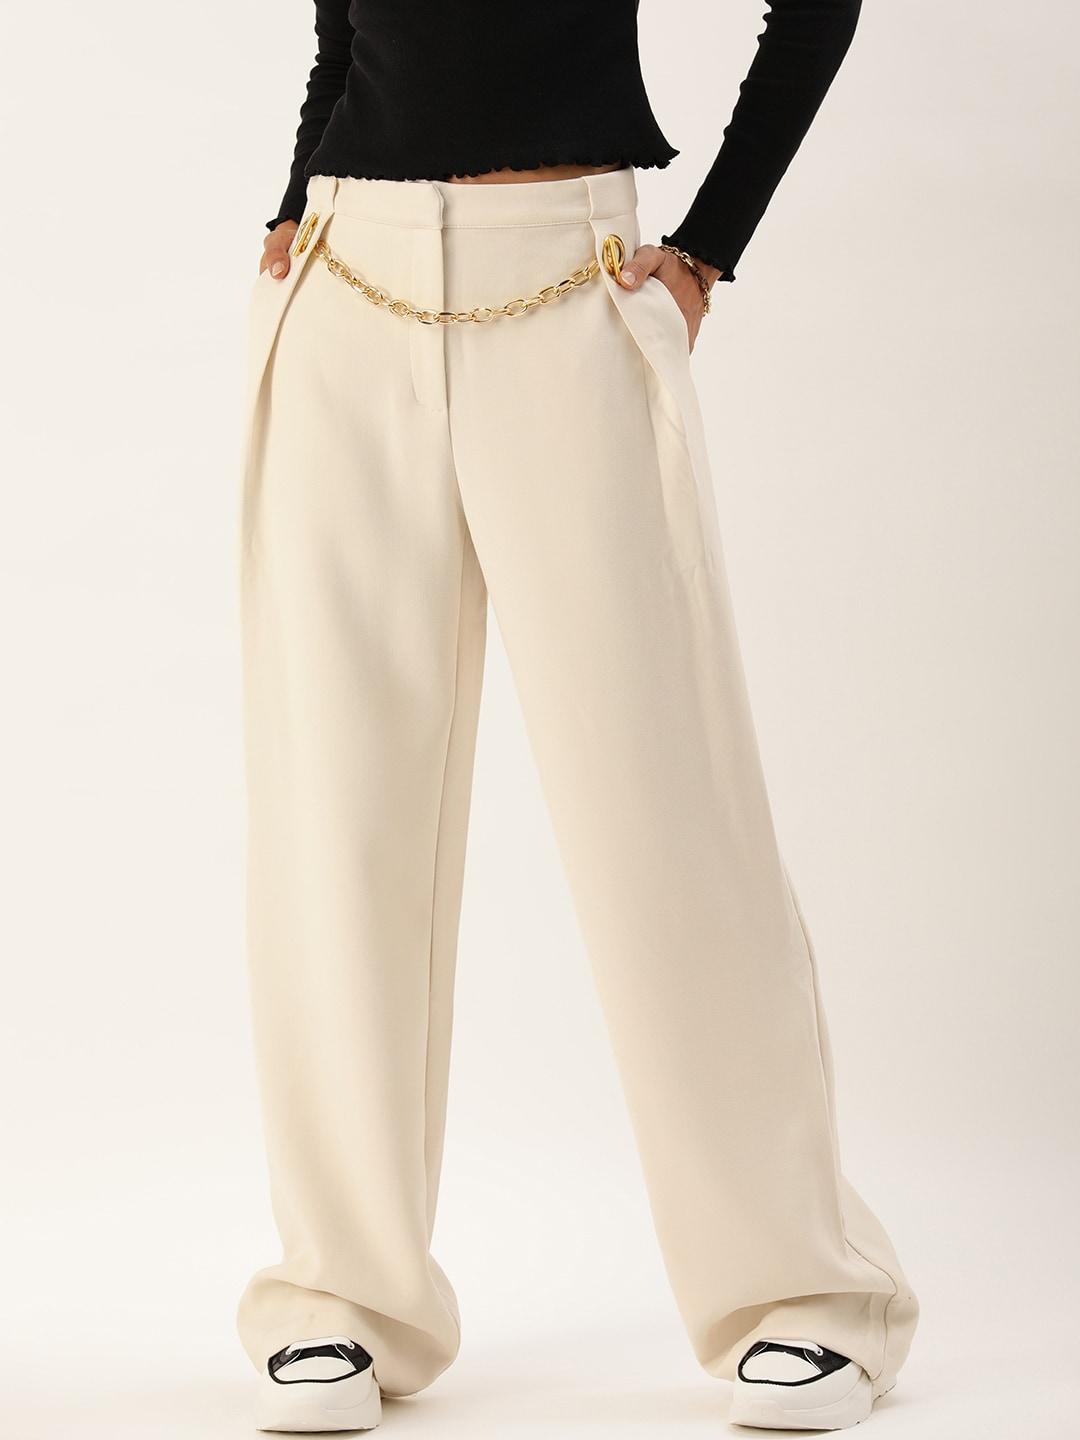 forever 21 women mid-rise pleated trousers with attached chain on front waist